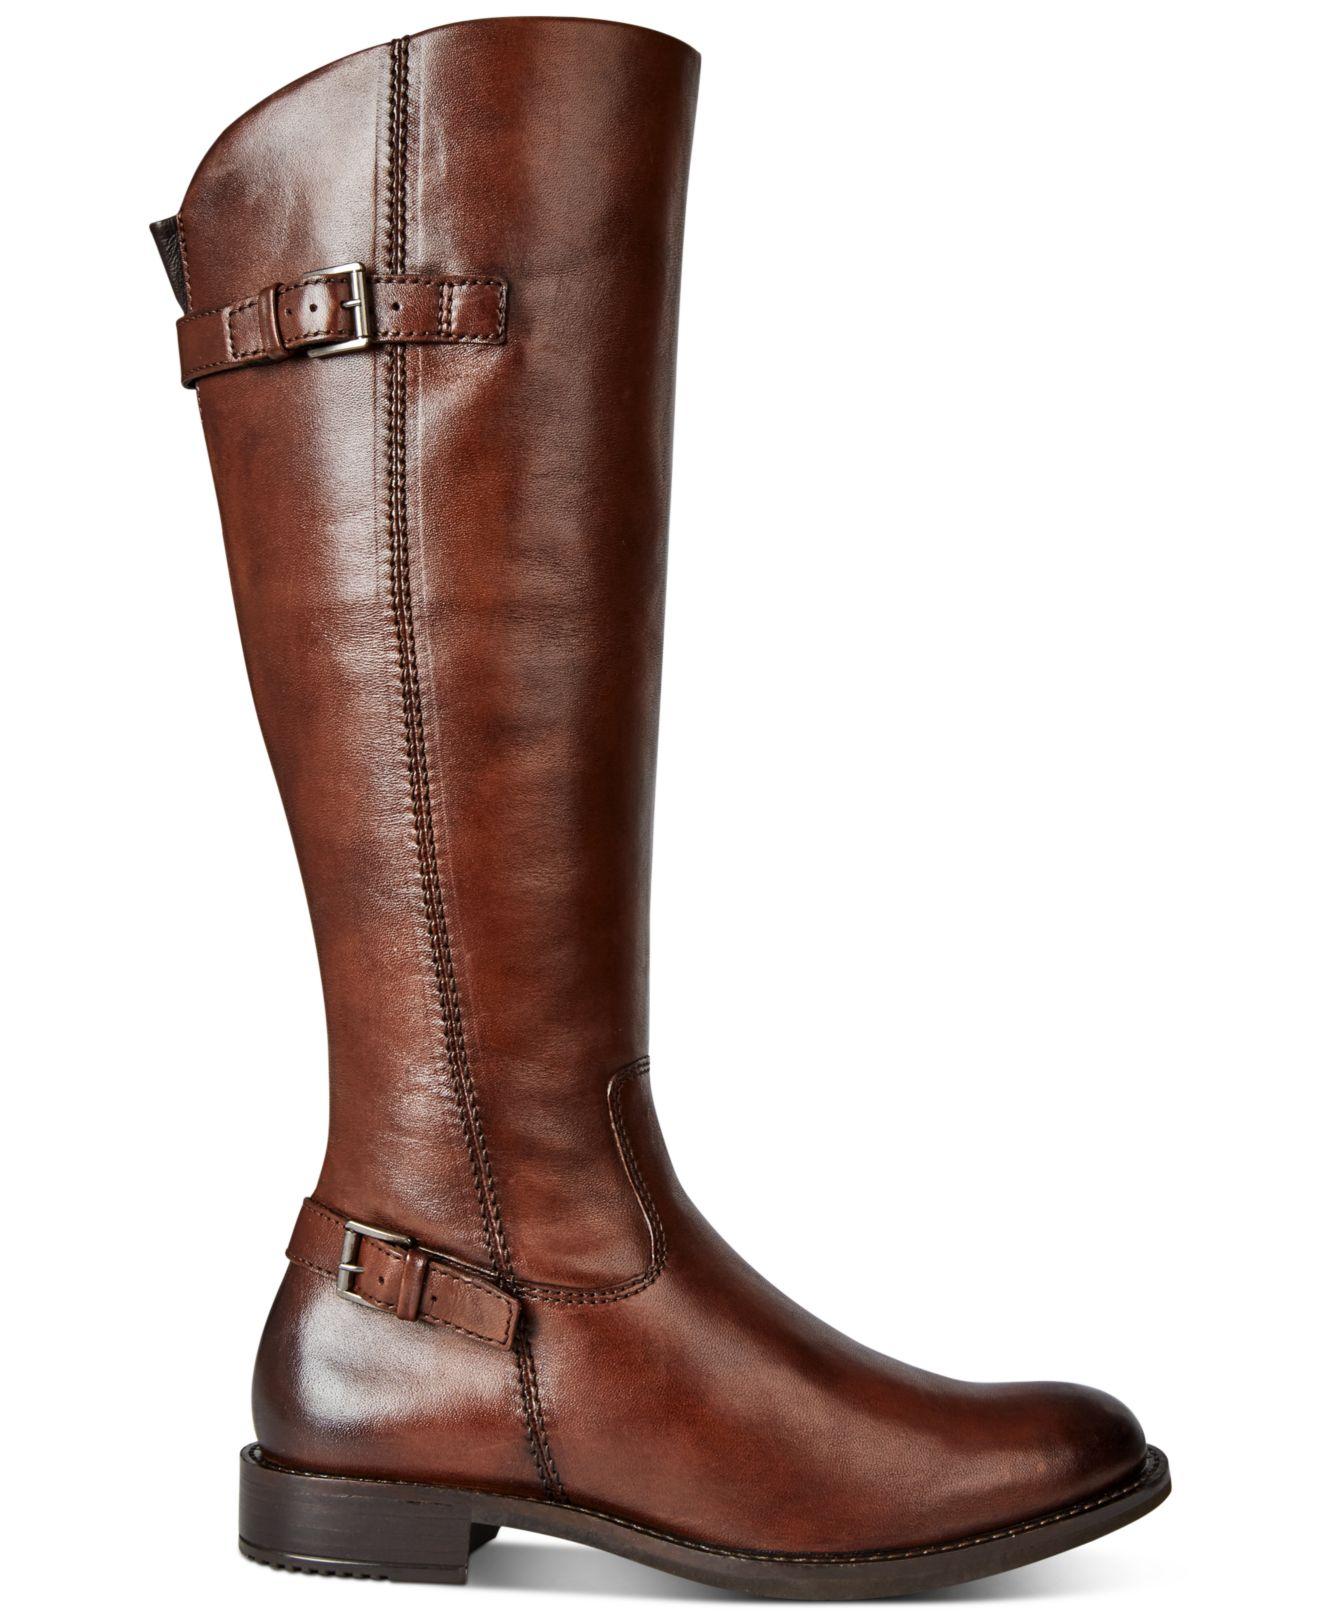 Ecco Sartorelle 25 Tall Buckle Boots in Brown Lyst